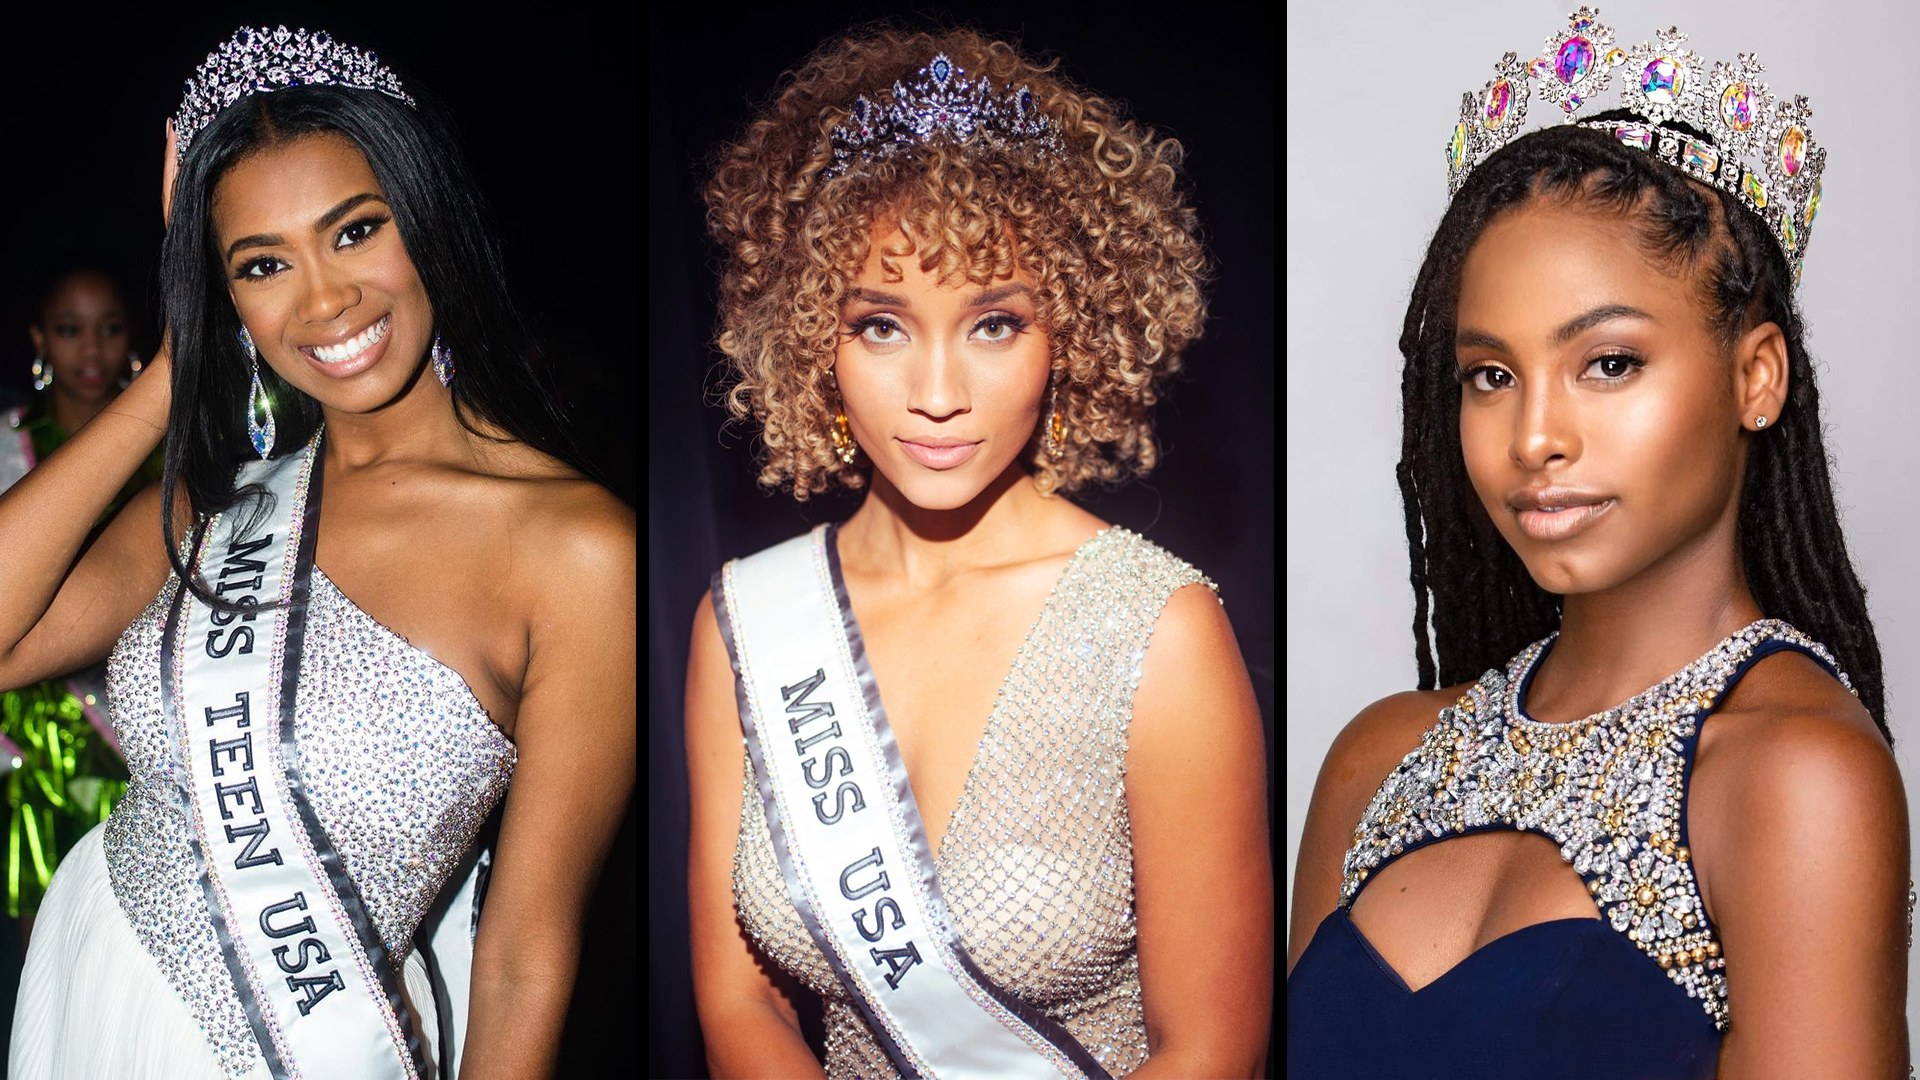 Historic first: All 5 major beauty pageant winners black